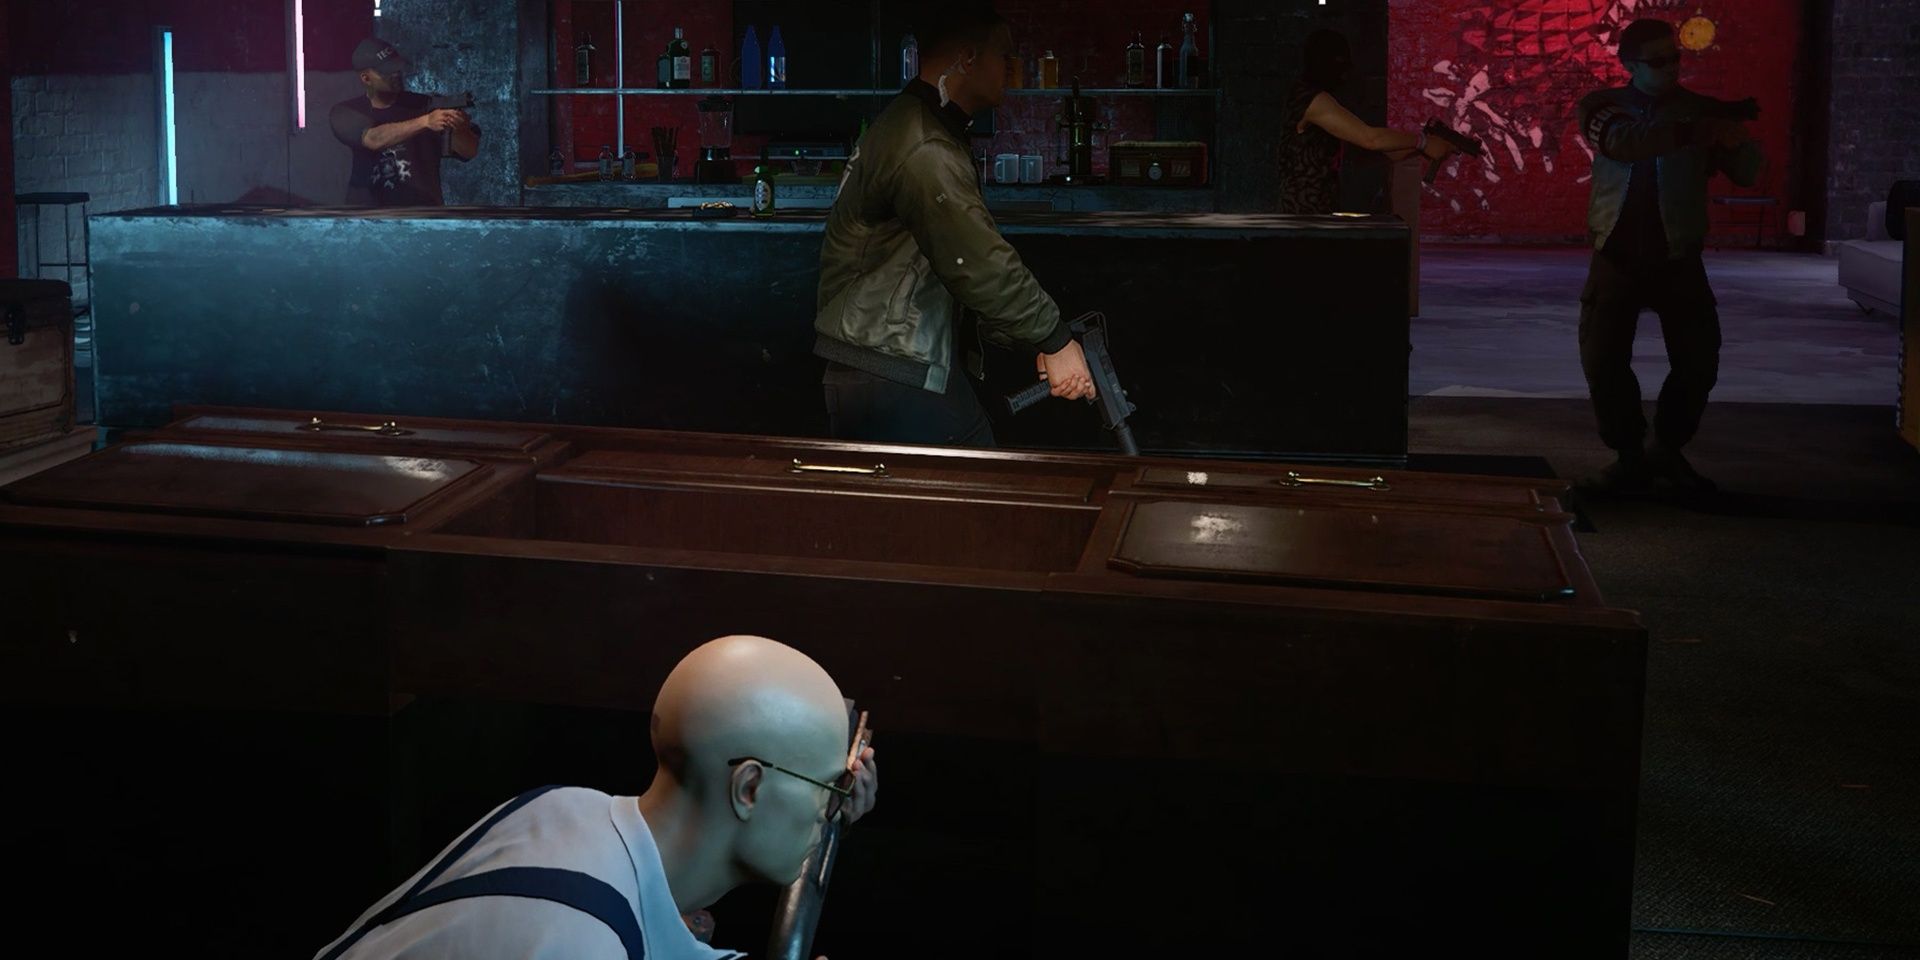 There Was A Fire Fight - Agent 47 Hiding Behind Table